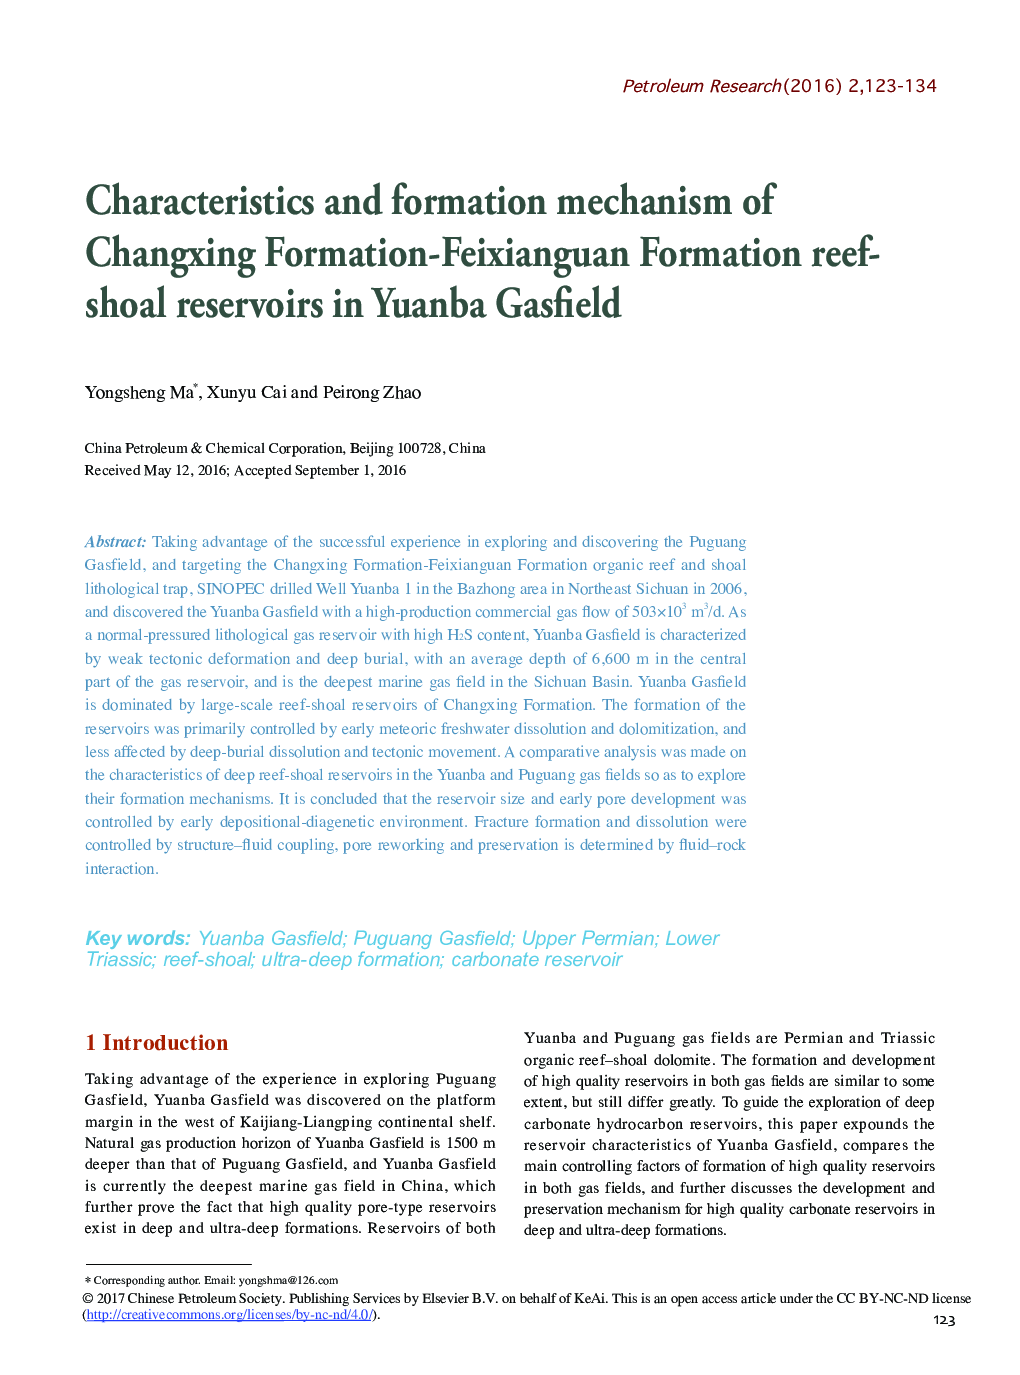 Characteristics and formation mechanism of Changxing Formation-Feixianguan Formation reef-shoal reservoirs in Yuanba Gasfield